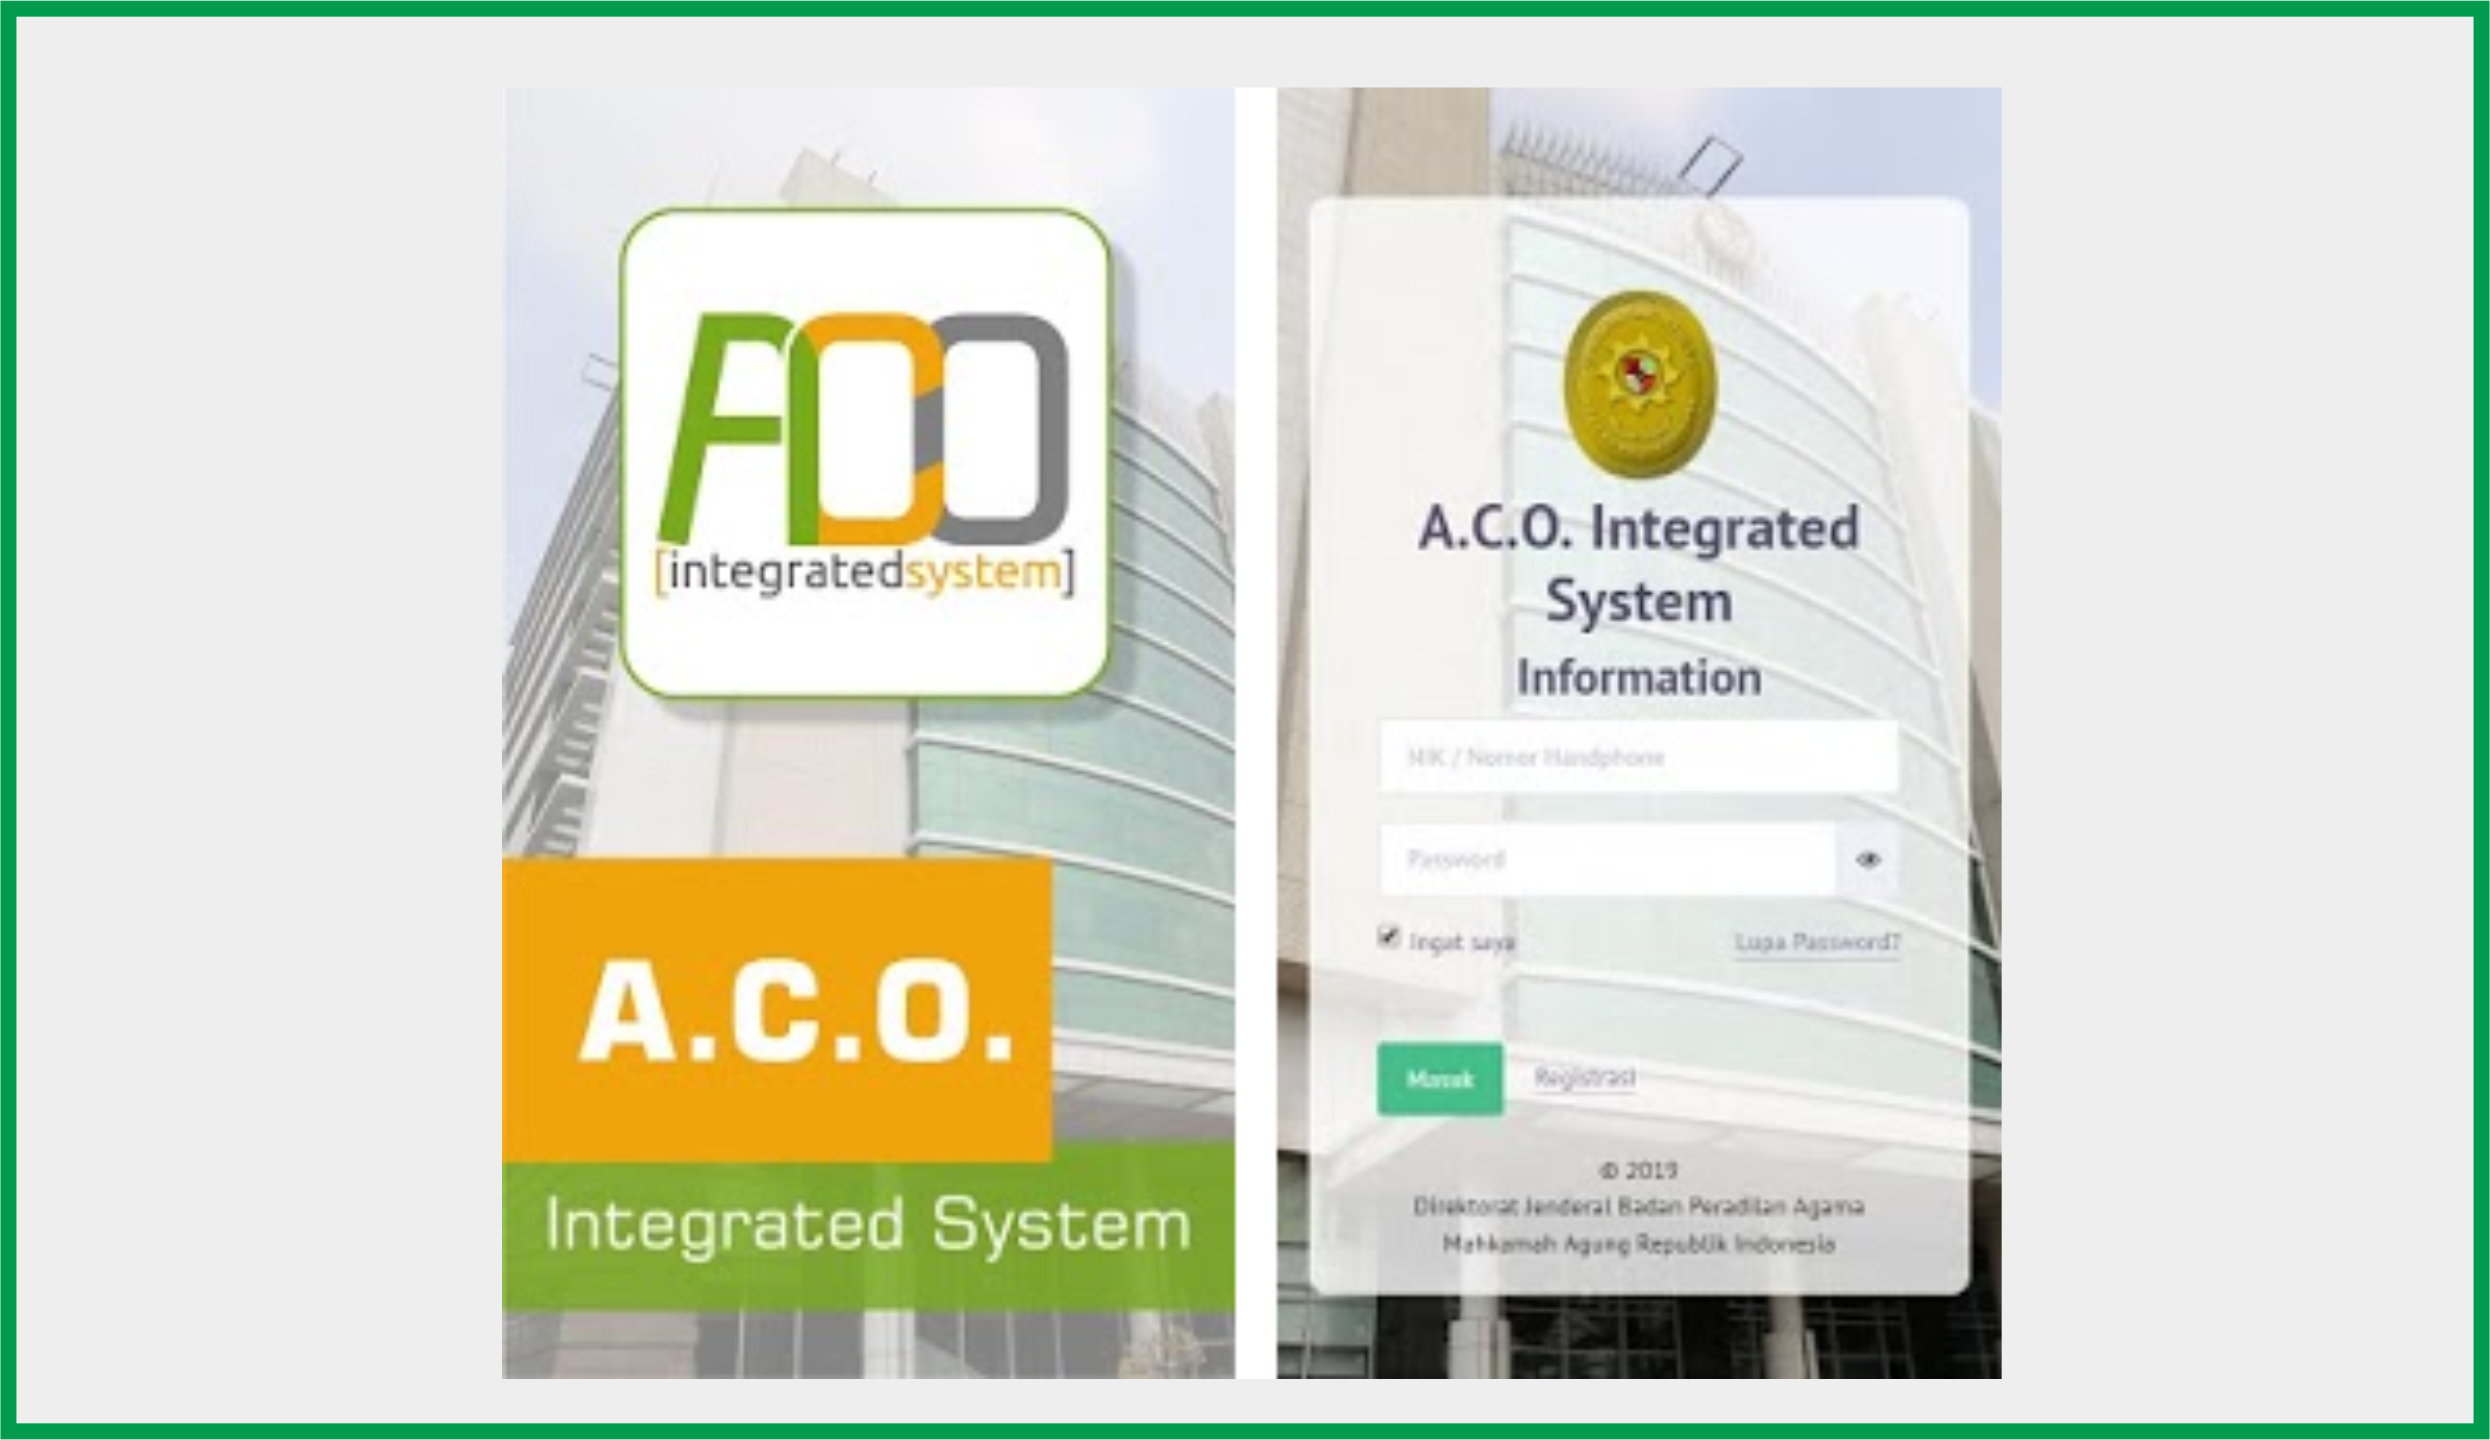 A.C.O. Integrated System